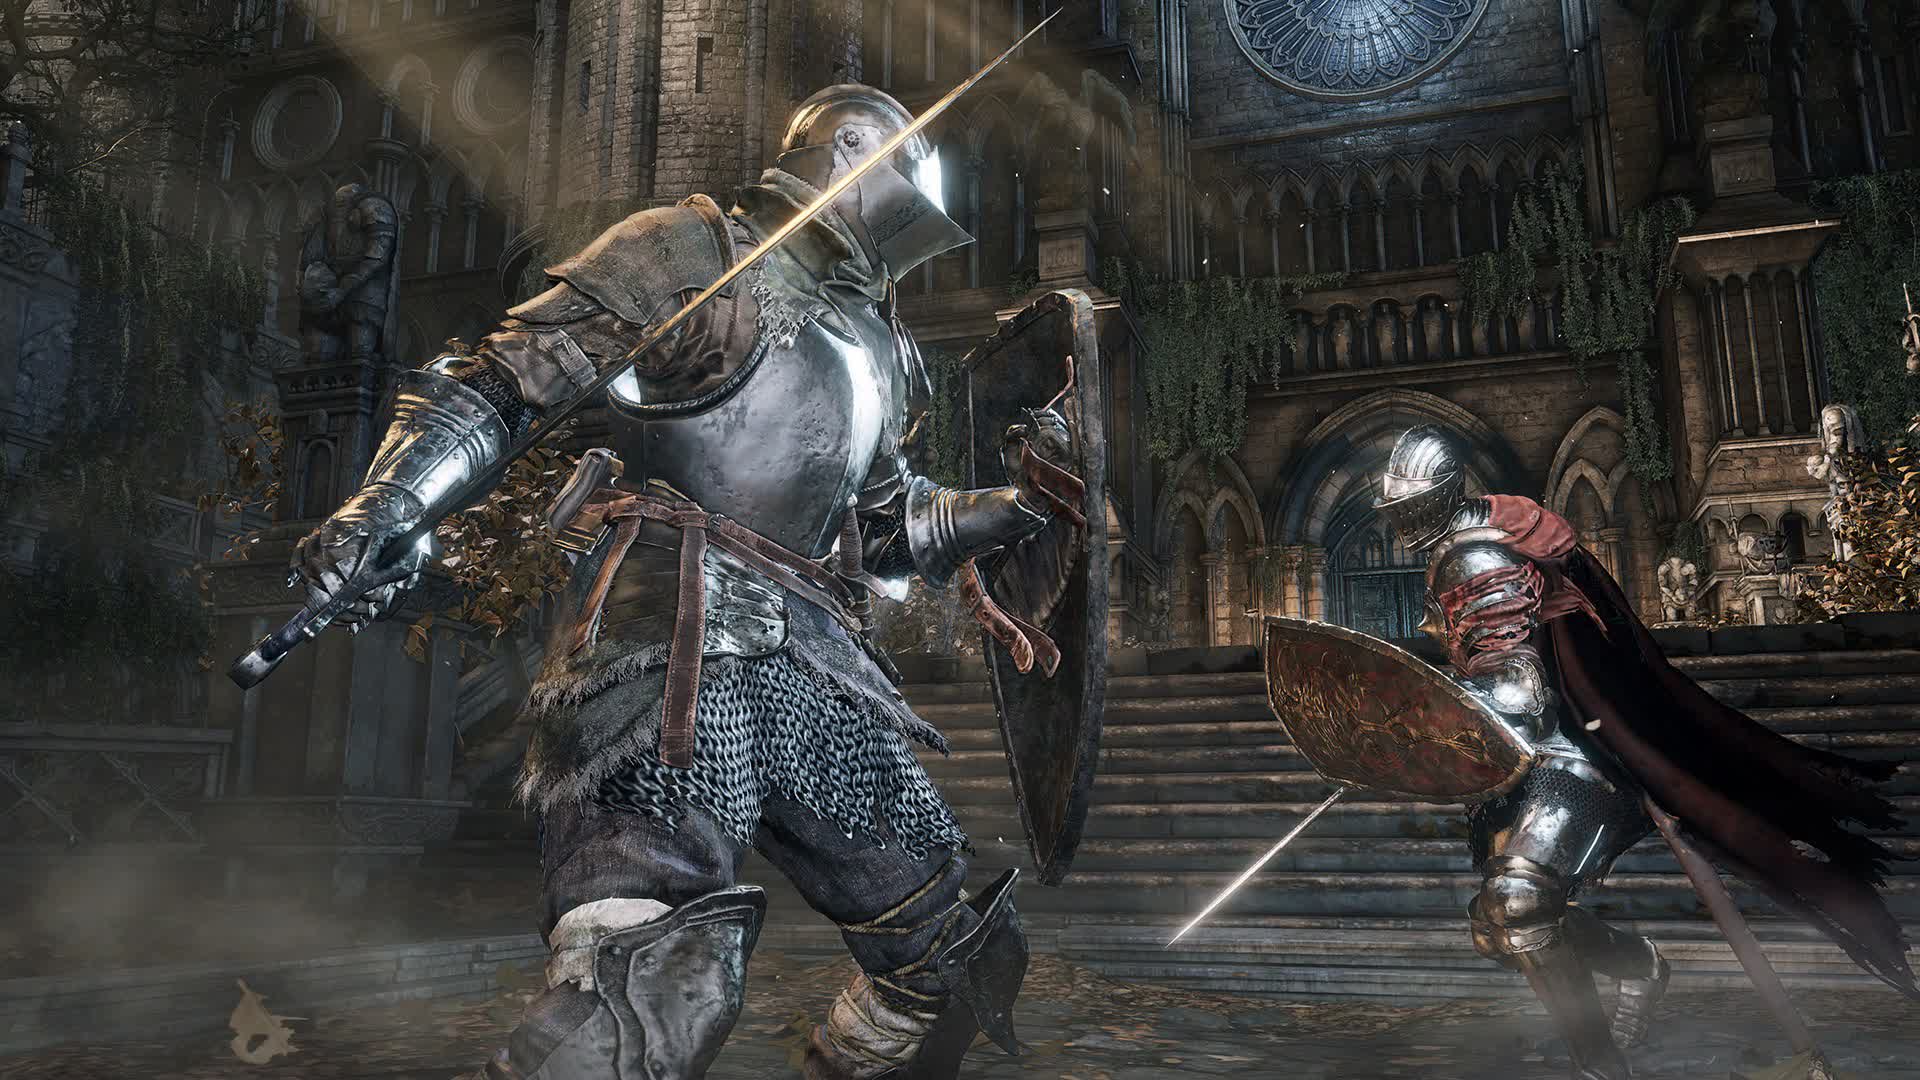 Dark Souls PvP servers suspended due to remote code execution exploit